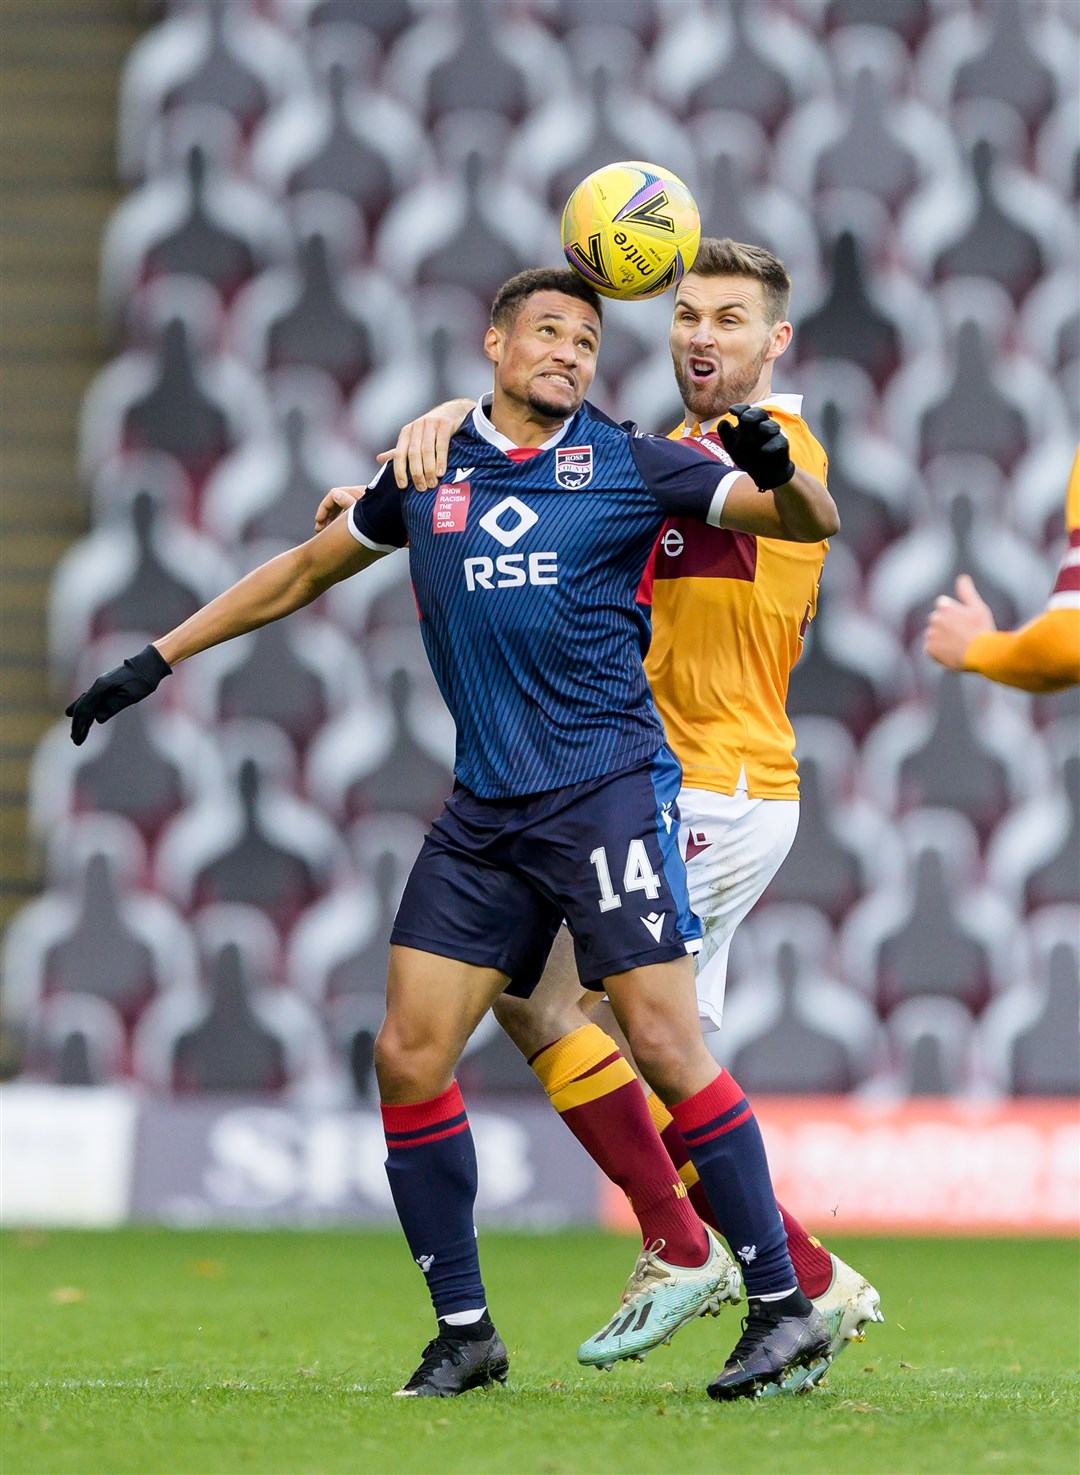 Picture - Ken Macpherson, Inverness. Motherwell(4) v Ross County(0). 24.10.19. Ross County's Jermaine Hylton holds off Motherwell's Stephen O'Donnell.